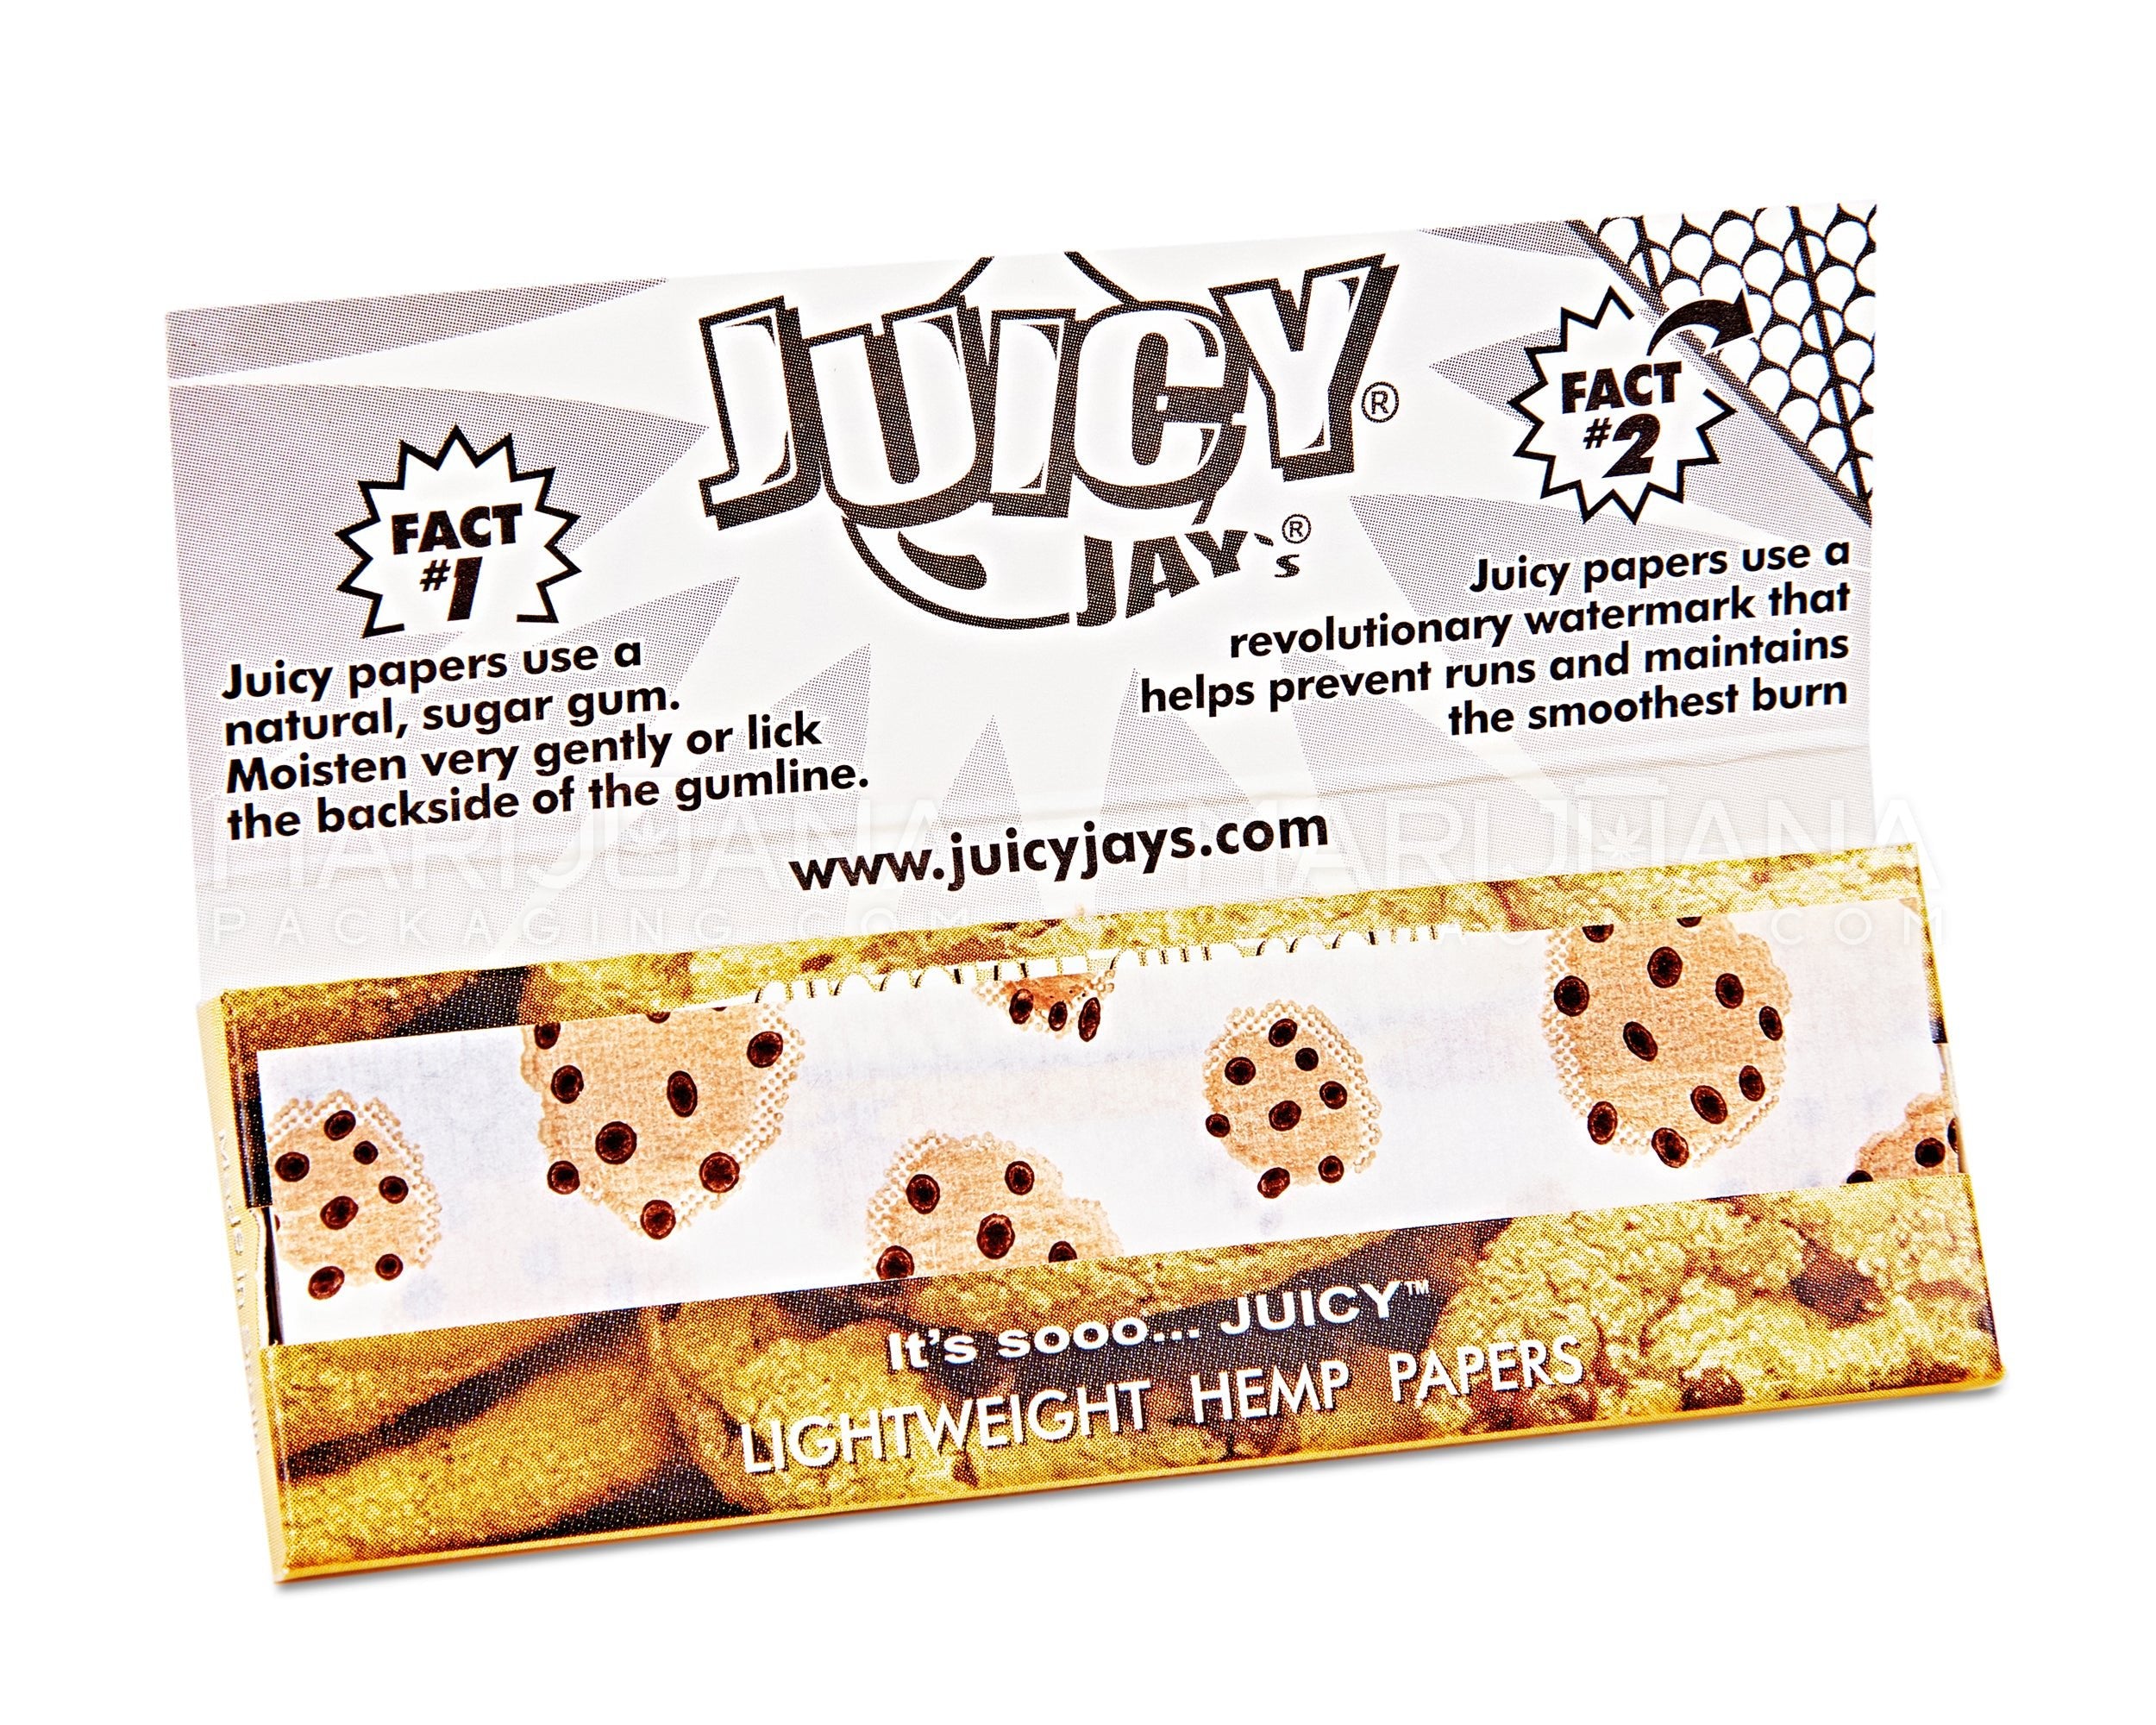 JUICY JAY'S | 'Retail Display' 1 1/4 Size Hemp Rolling Papers | 76mm - Chocolate Chip Cookie - 24 Count - 3